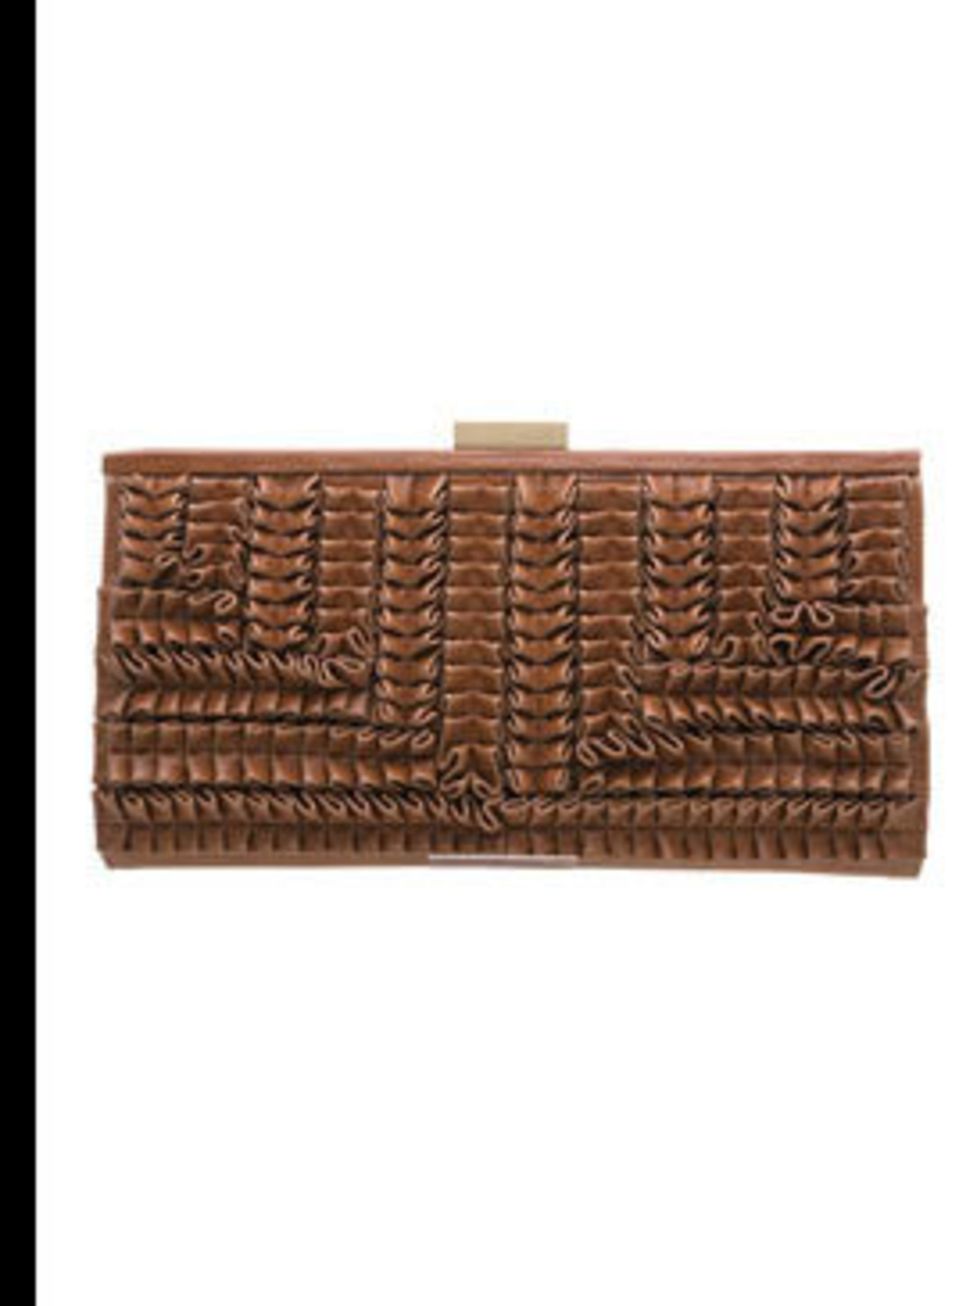 <p>Clutch bag, £45 by <a href="http://www.dune.co.uk/catalogue/style.asp?r=46&amp;g=45&amp;s=59&amp;y=S09APU83BGM626N">Dune</a></p>